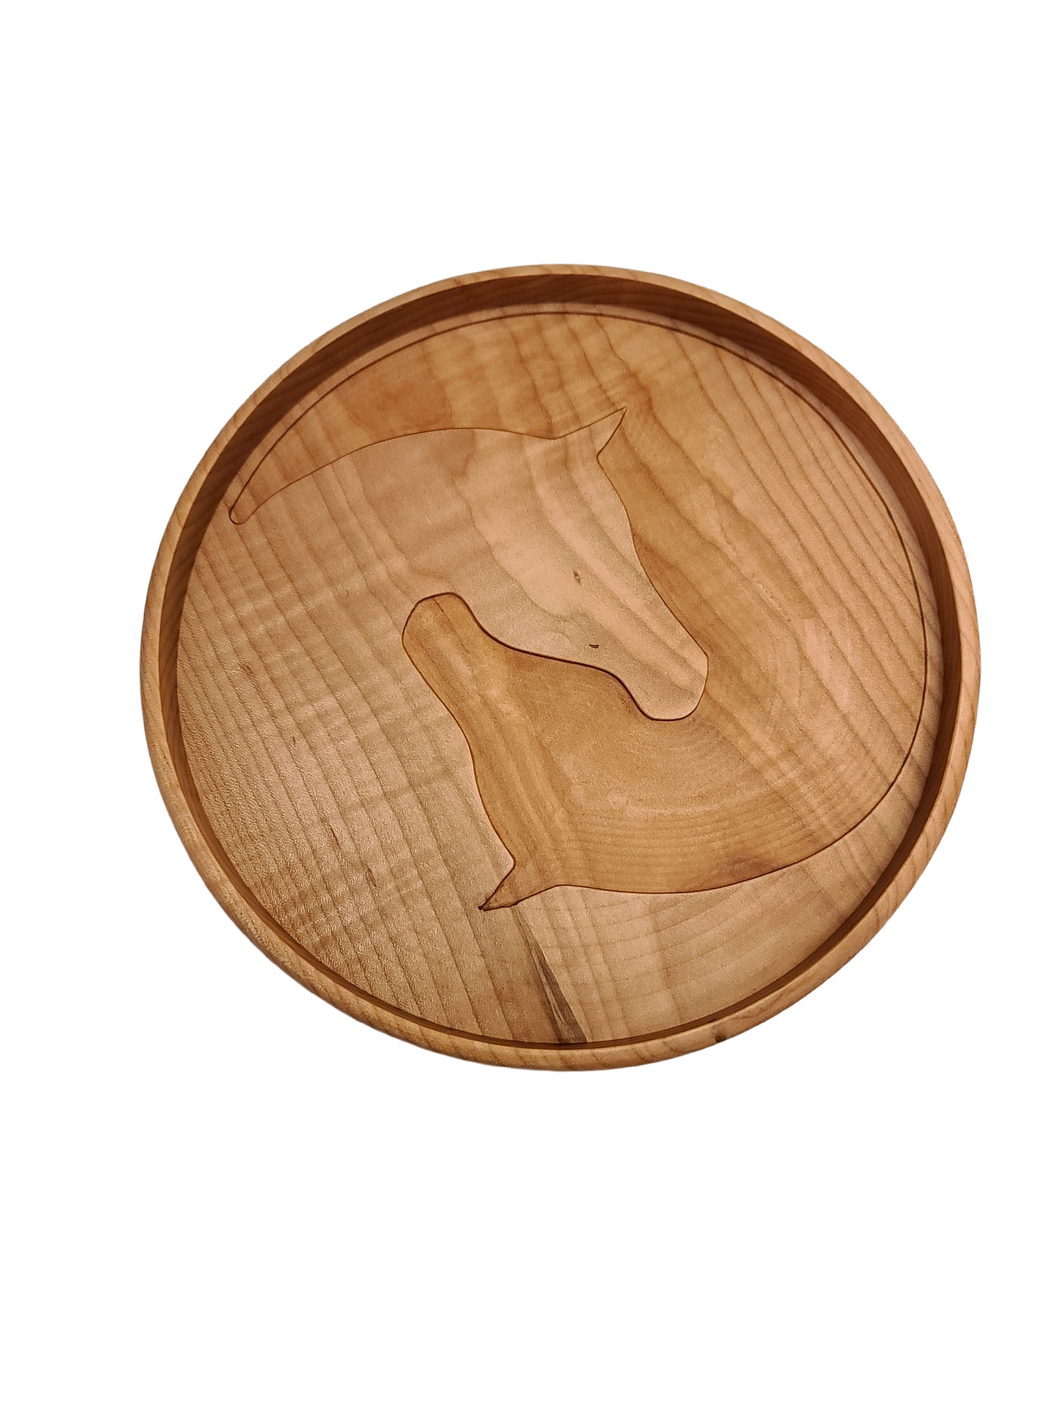 Yin Yang hand crafted wood catch-all tray (made to order)